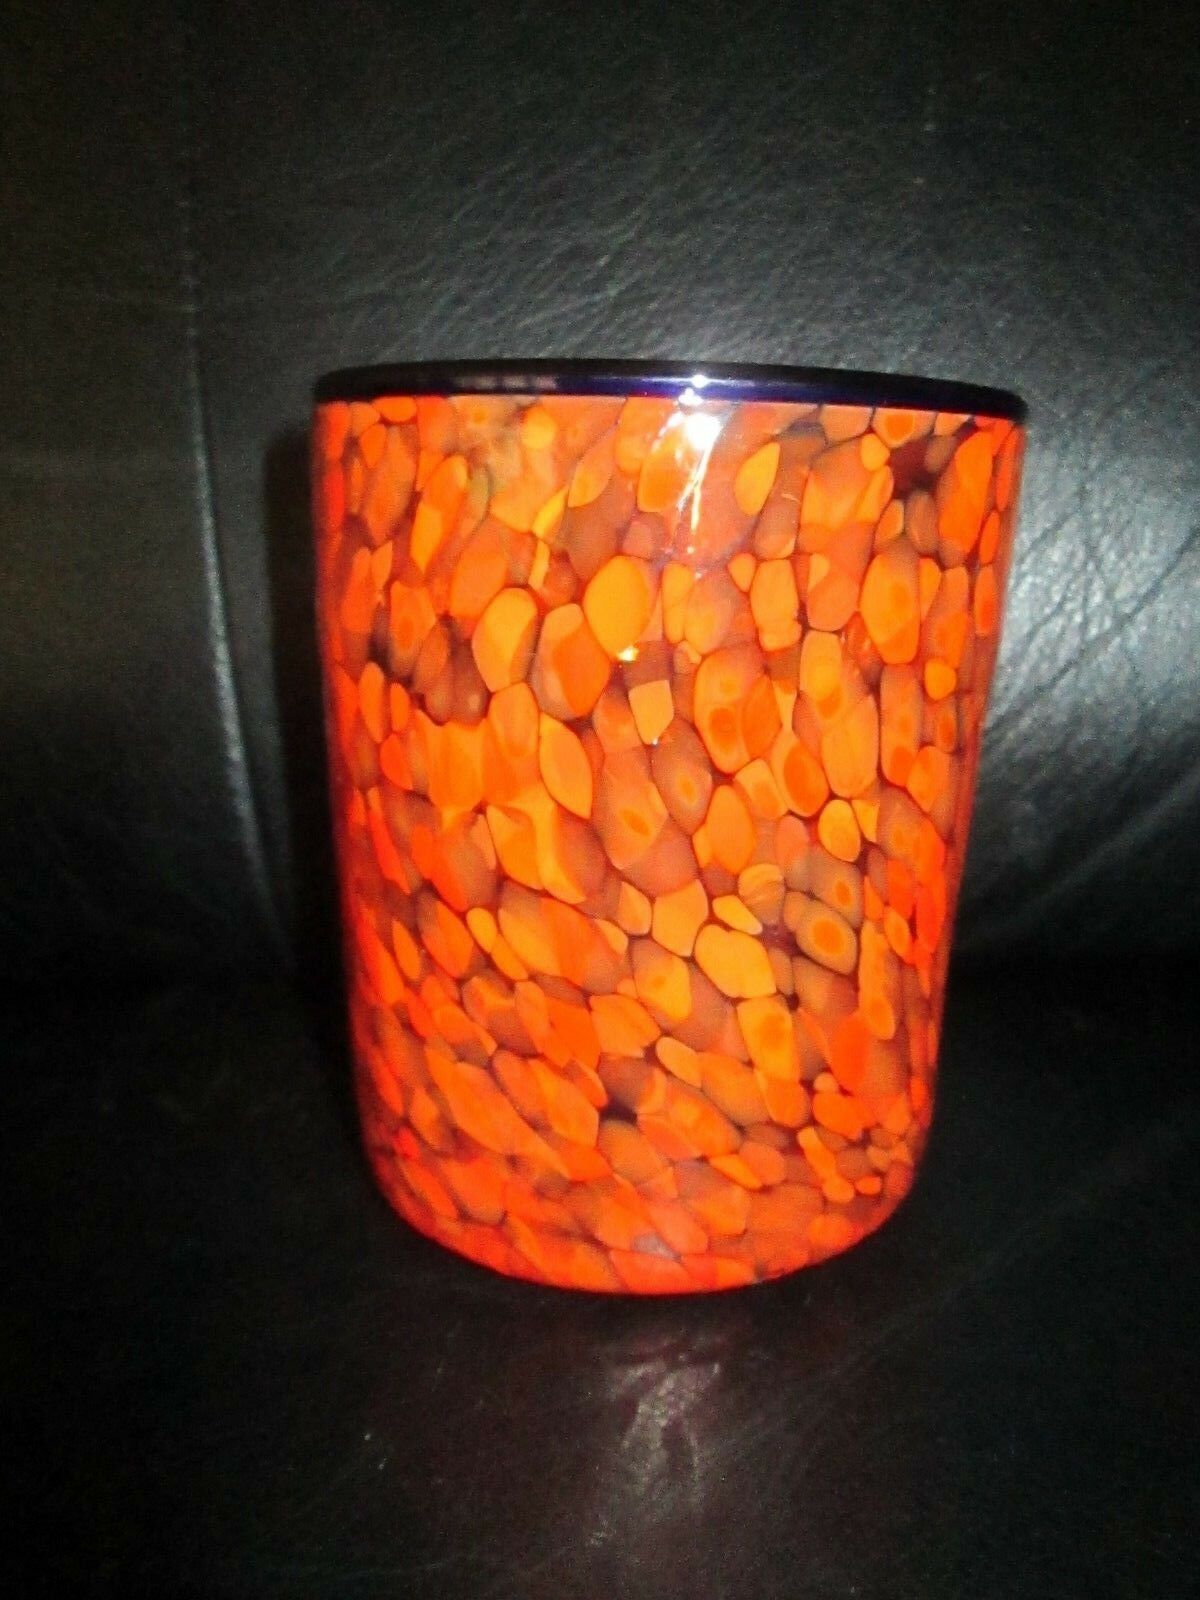 Unique 4 1/4" Tall Orange Specks Art Glass Old Fashioned Or Vase Hand Blown Cup